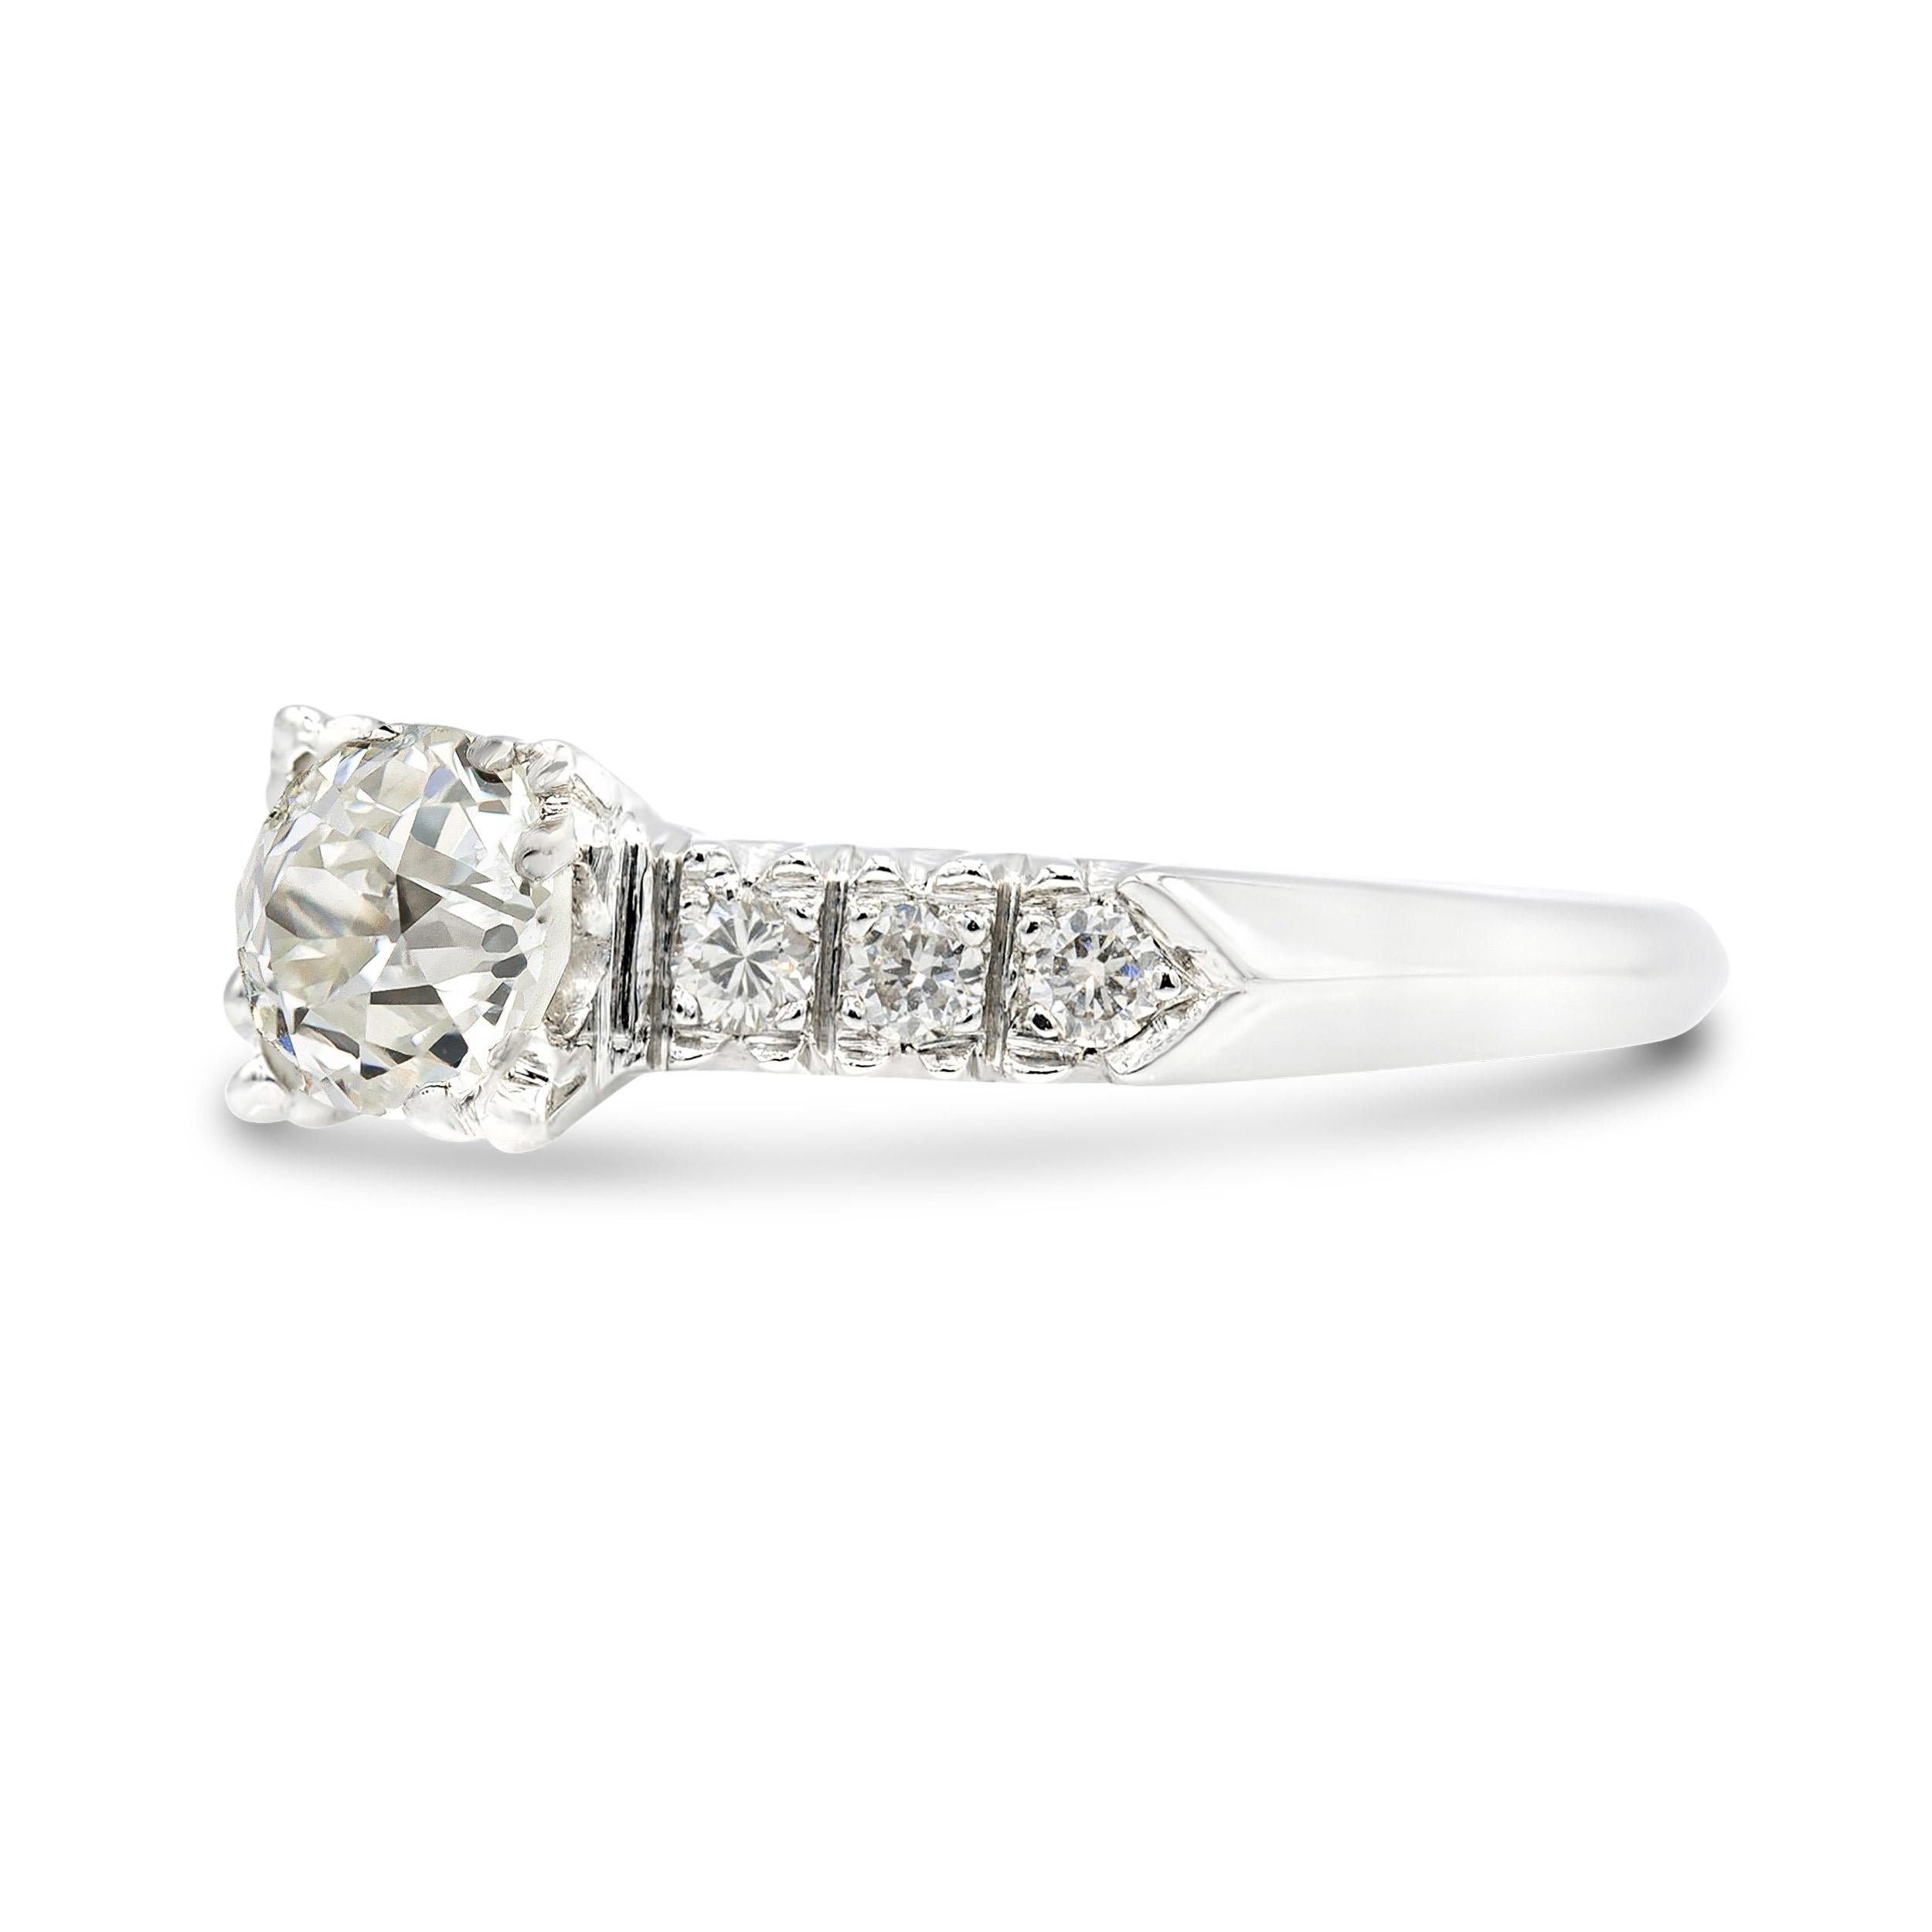 This is a classic of an Art Deco ring as it gets. Graded J VS2 by GIA, the old European center features a small table and has true deco-style faceting. On each side of the fishtail prong set stone, you can find three prong-set transitional round cut